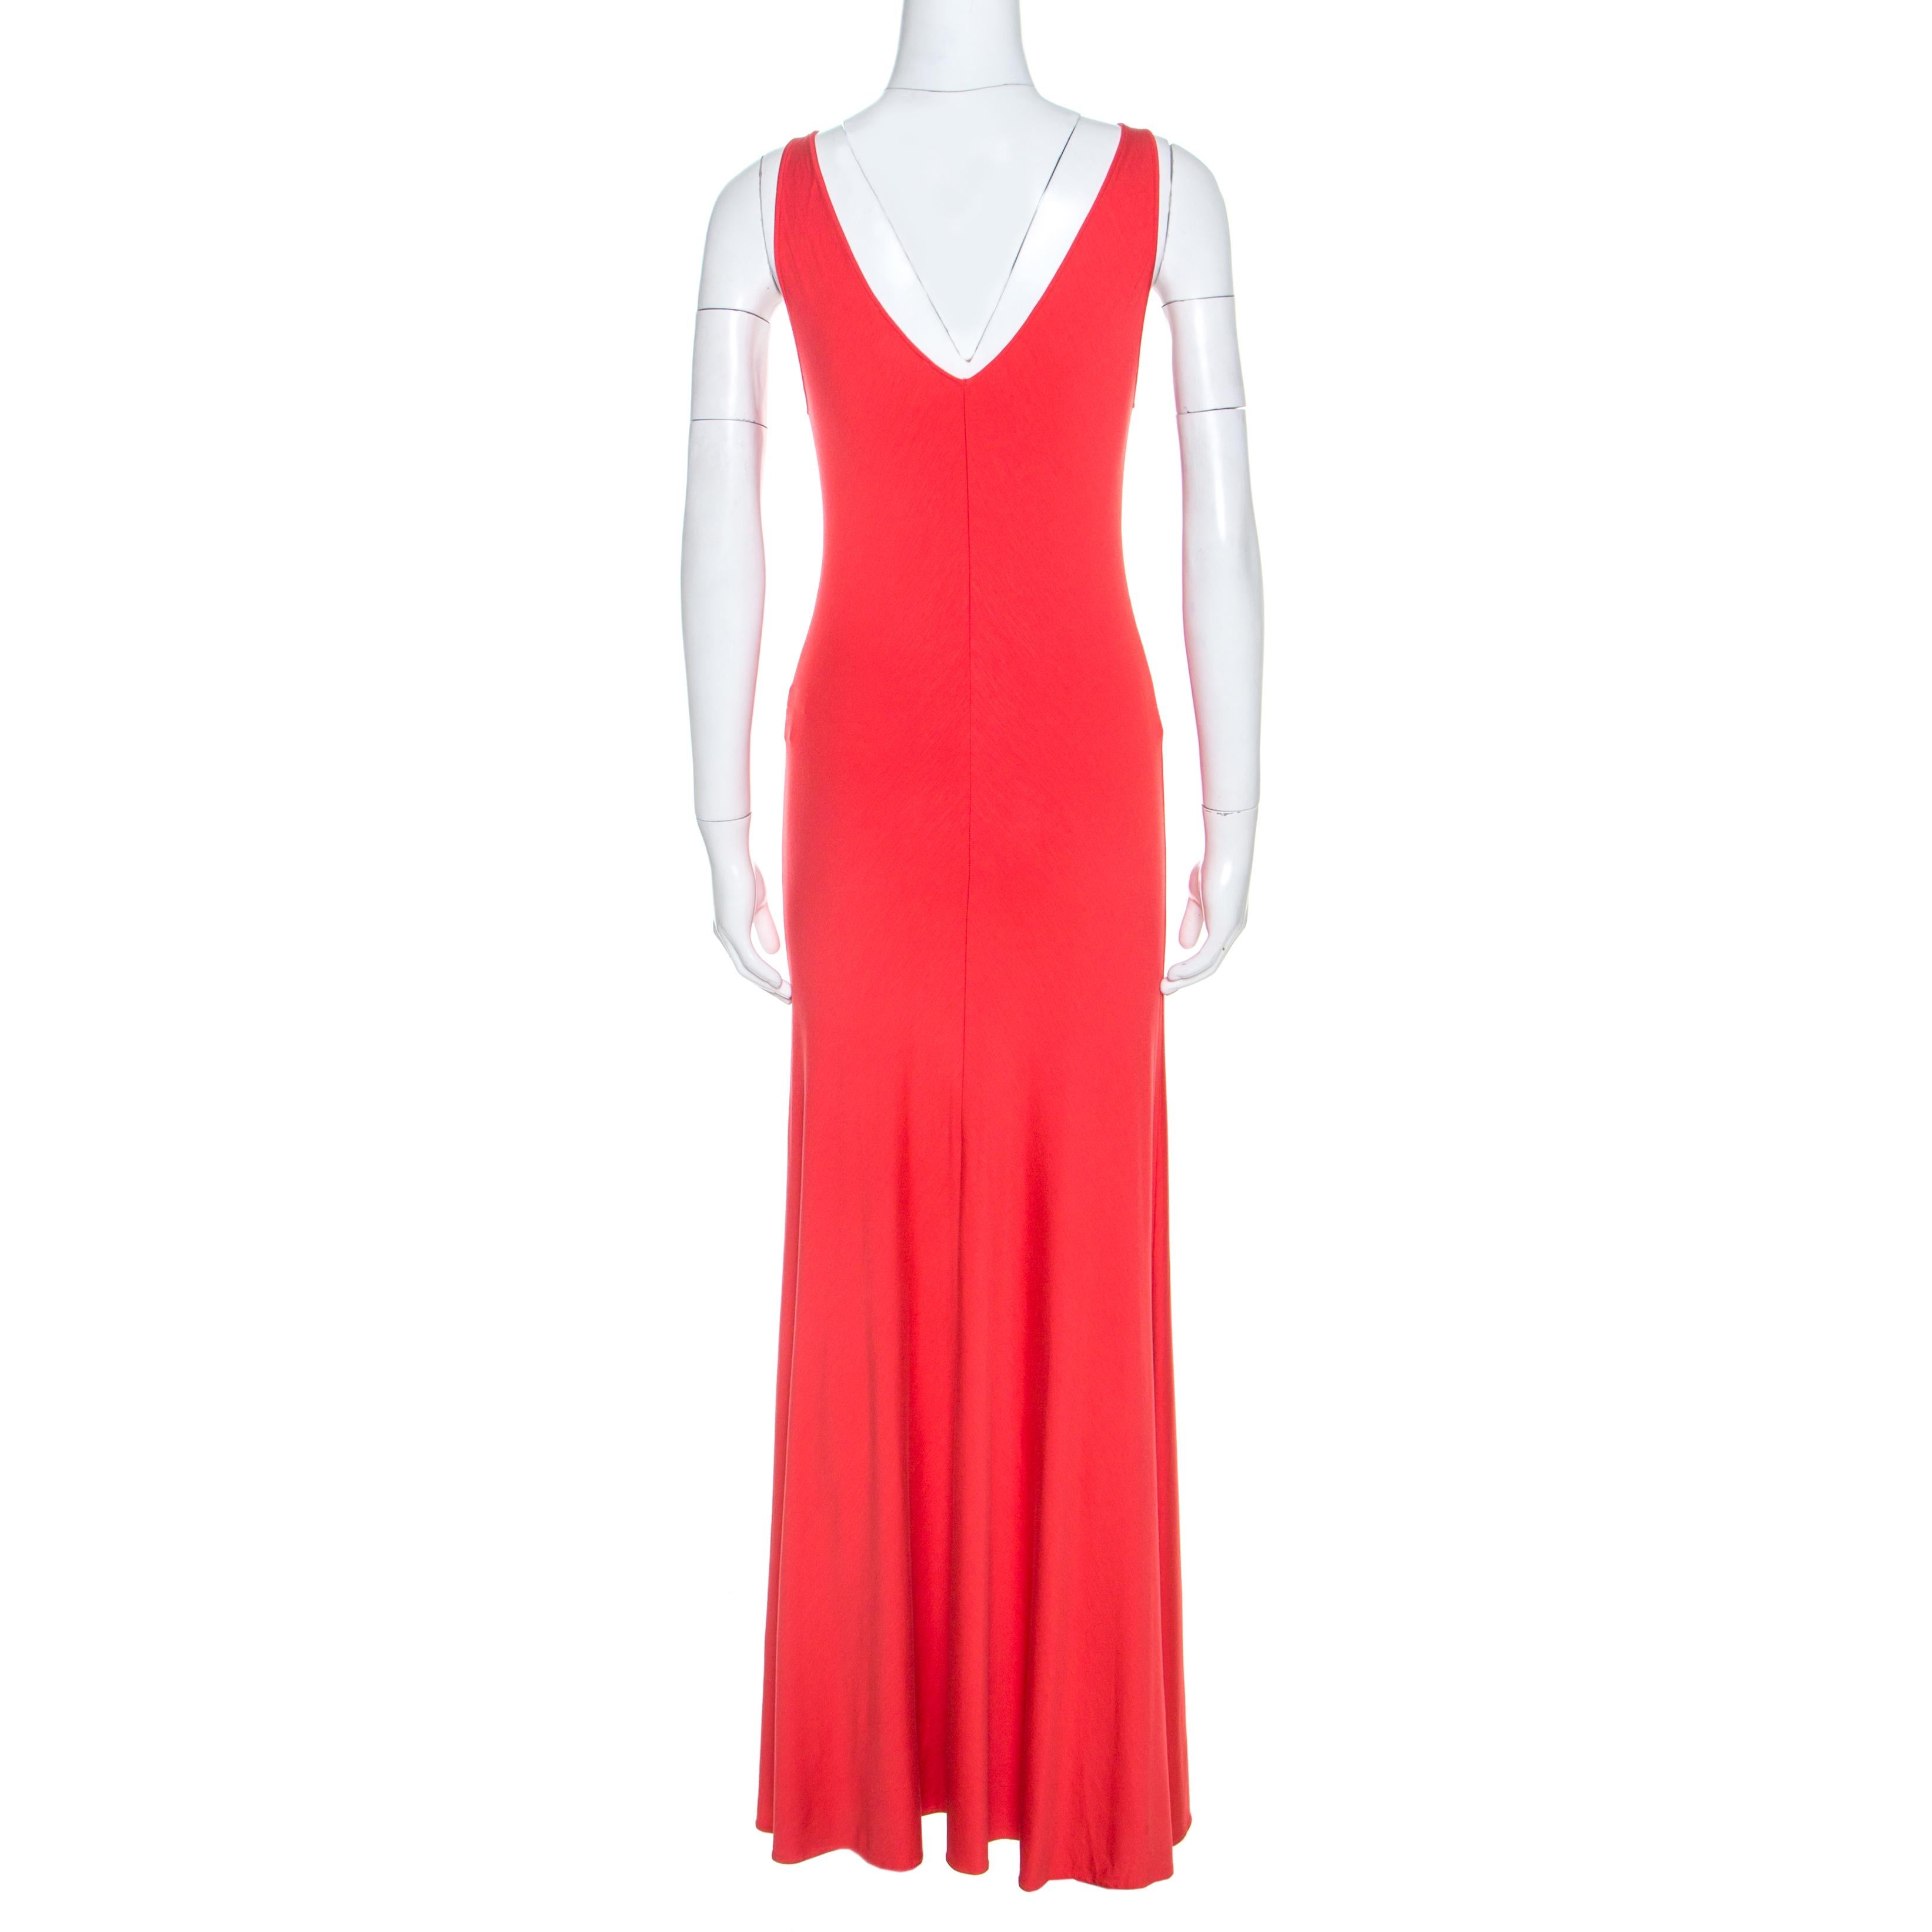 You can always rely on a Ralph Lauren dress like this one. Be it a day or a night event, you cannot go wrong with this coral pink dress. Quality fabrics have been cut masterfully to shape this gem of a dress.

